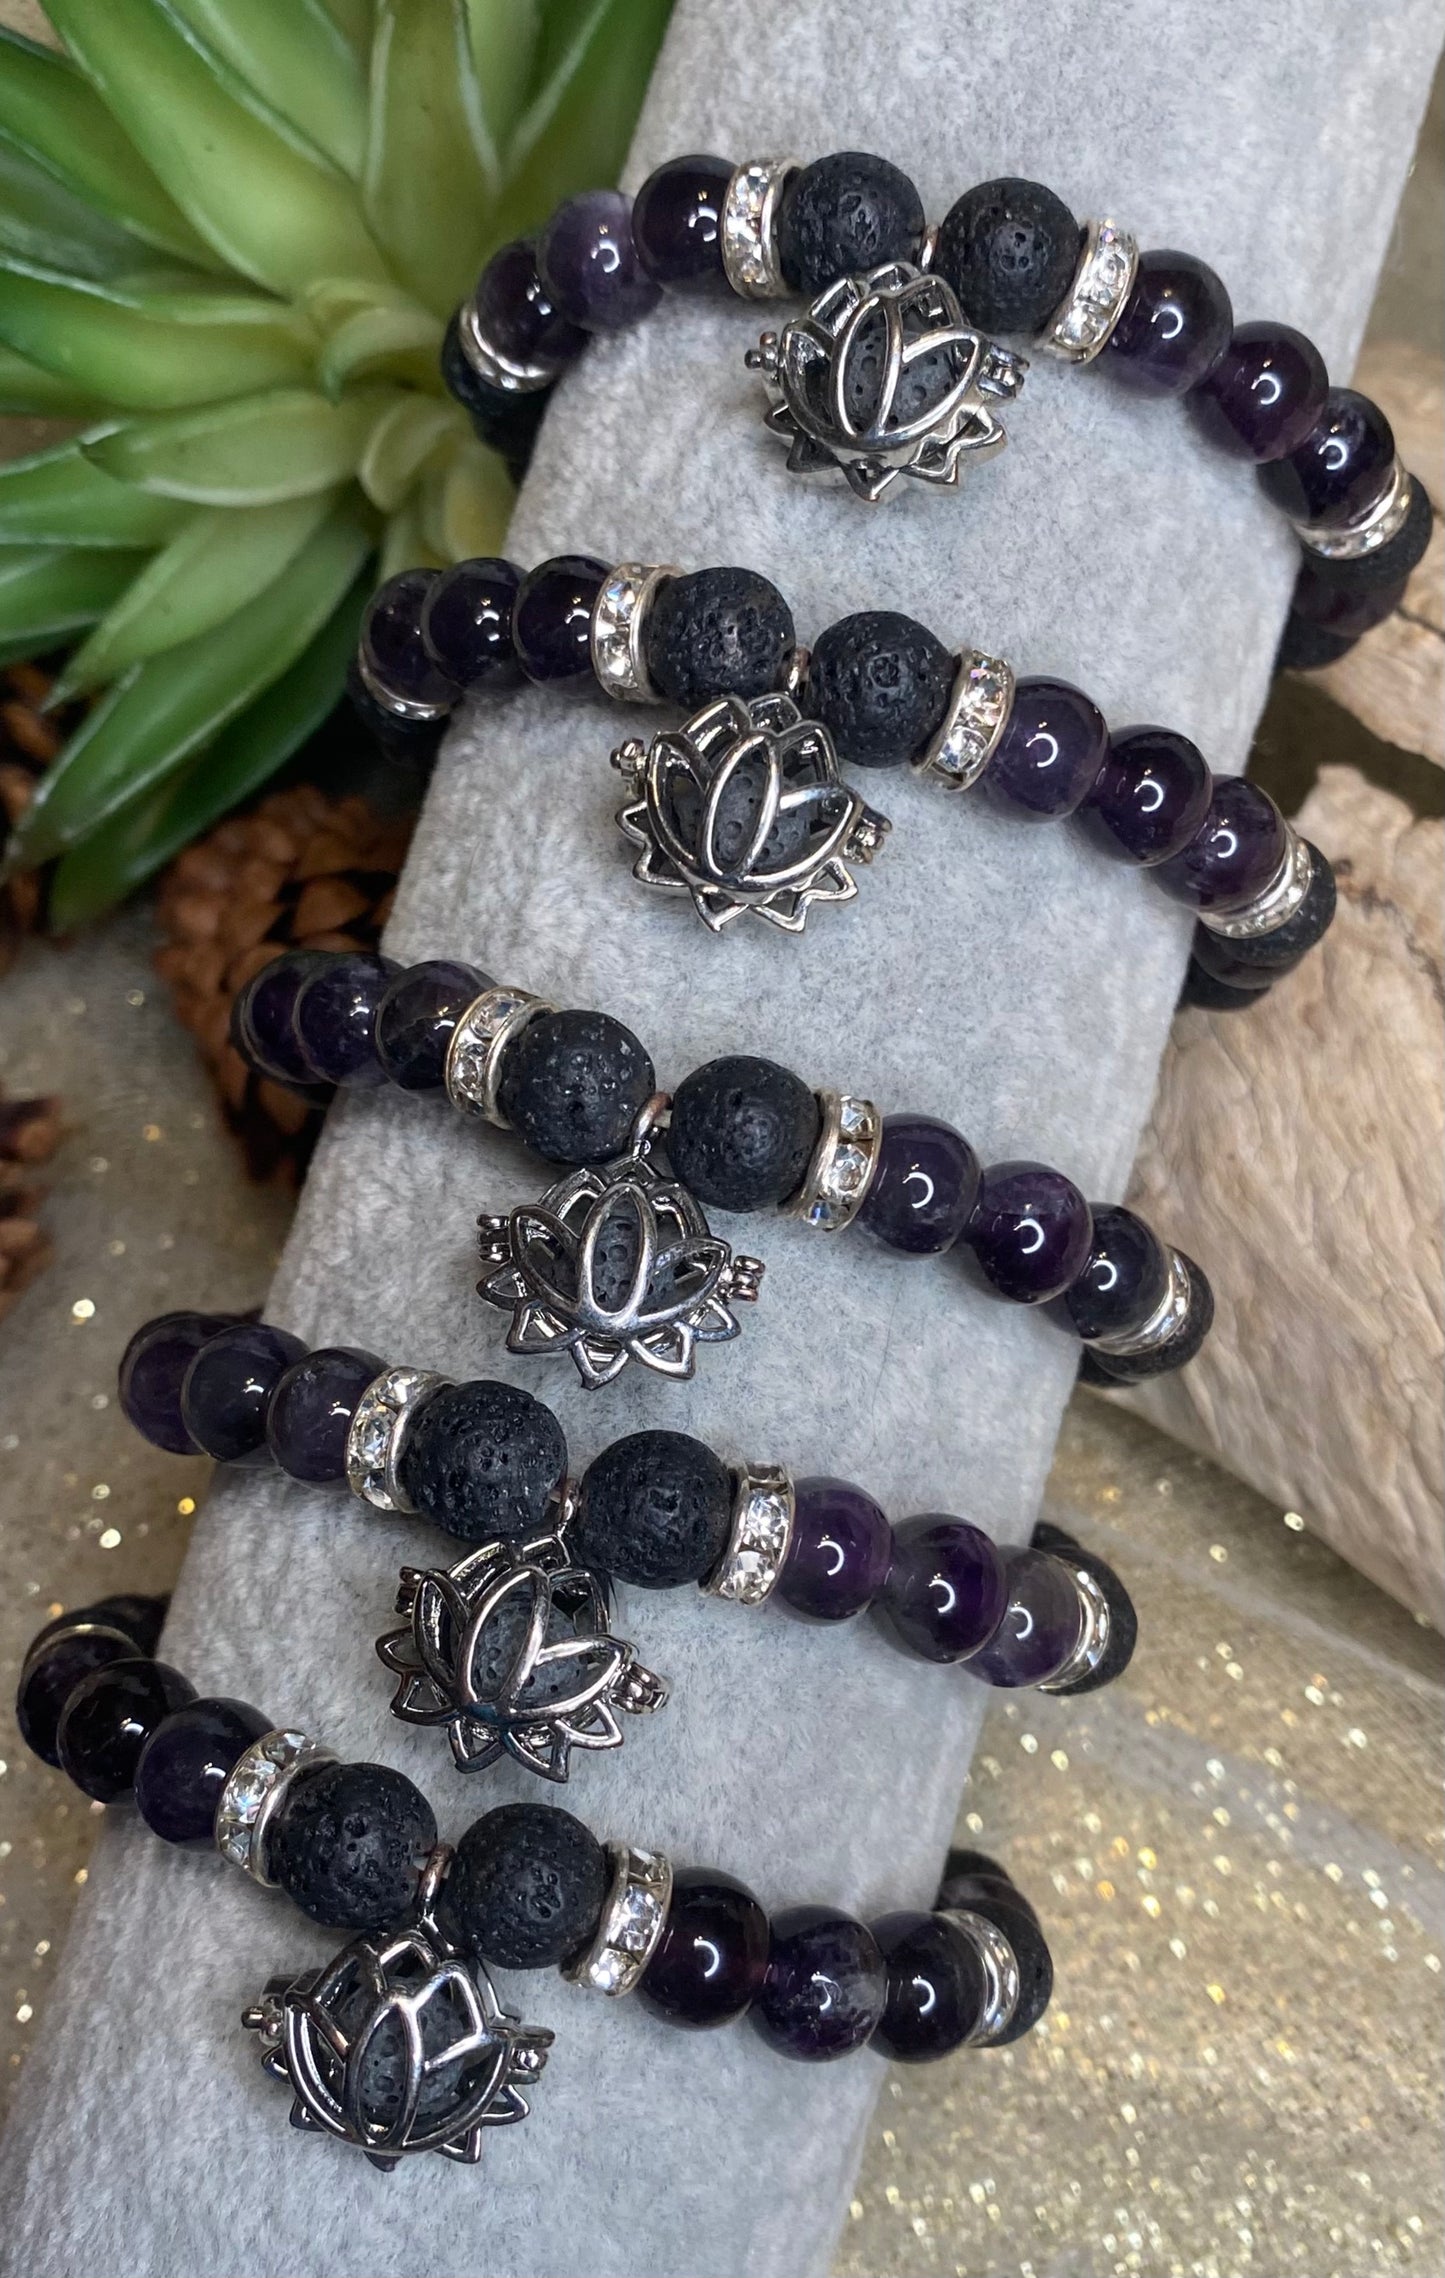 Serenity Blooms Amethyst & Lava Aromatherapy Bracelet With Lotus Flower Charm